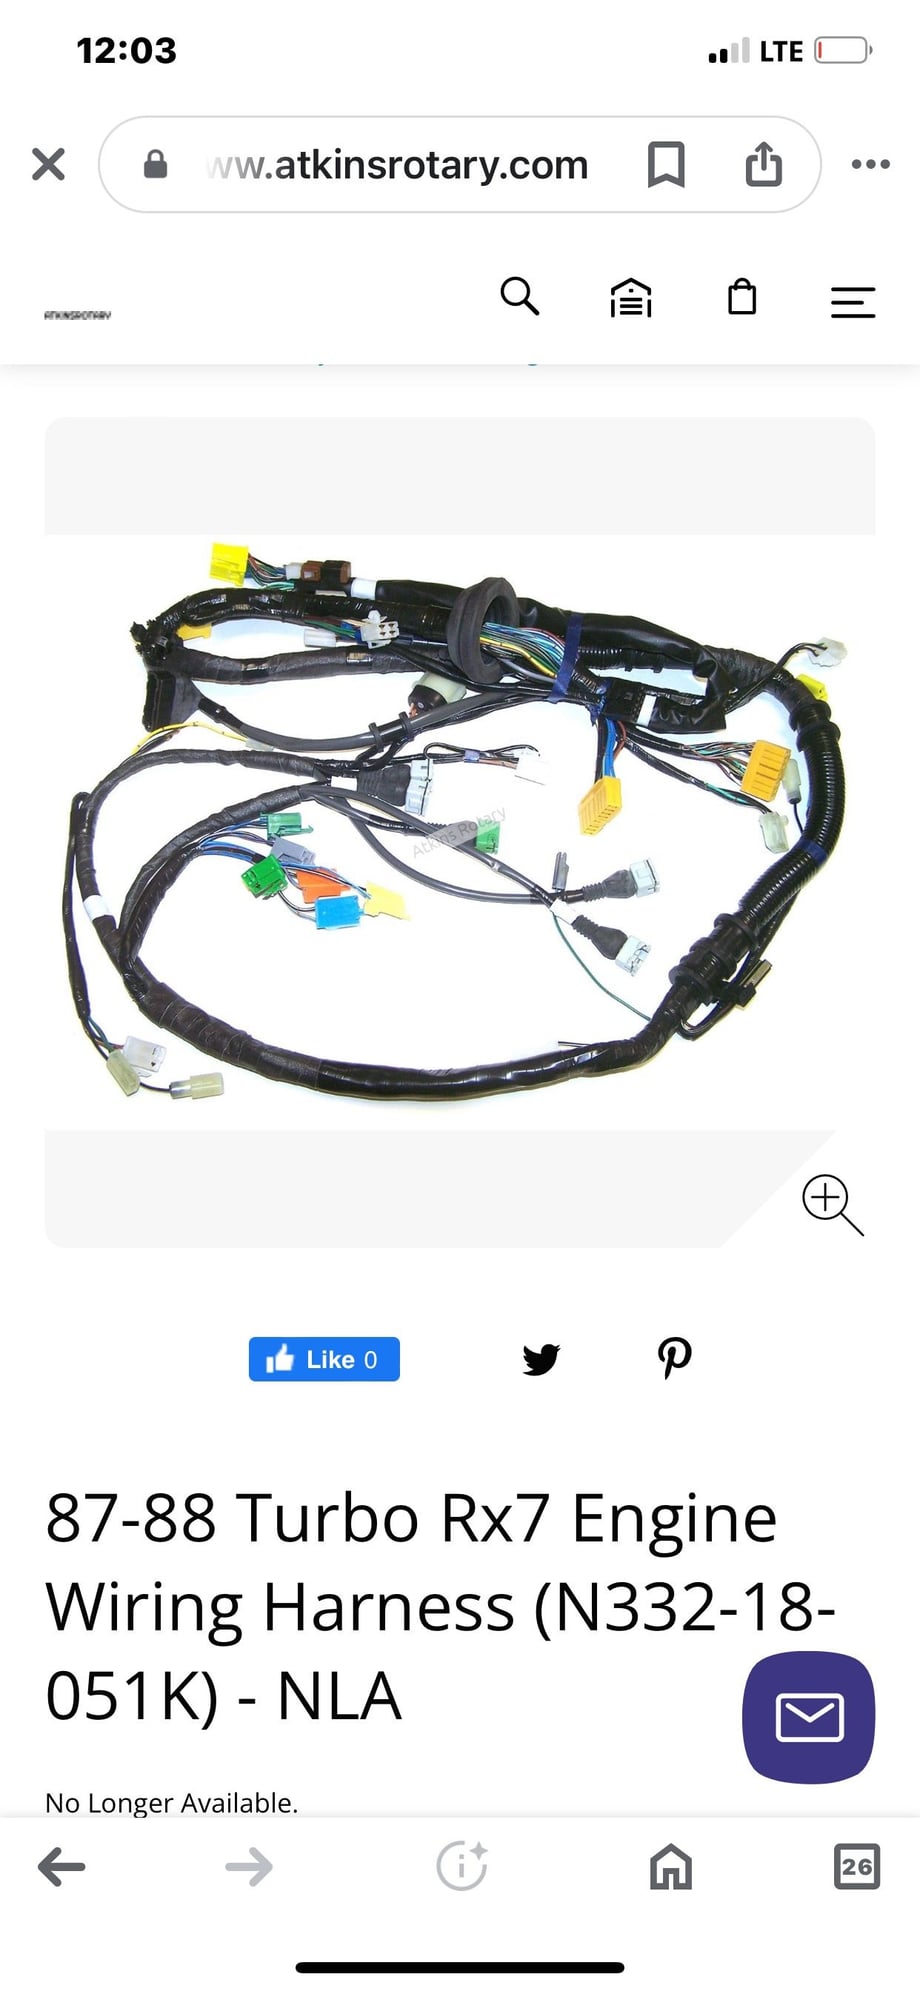 Engine - Electrical - Want to buy 87-88 Turbo engine wiring harness with ECU - New or Used - Prince Frederick, MD 20678, United States